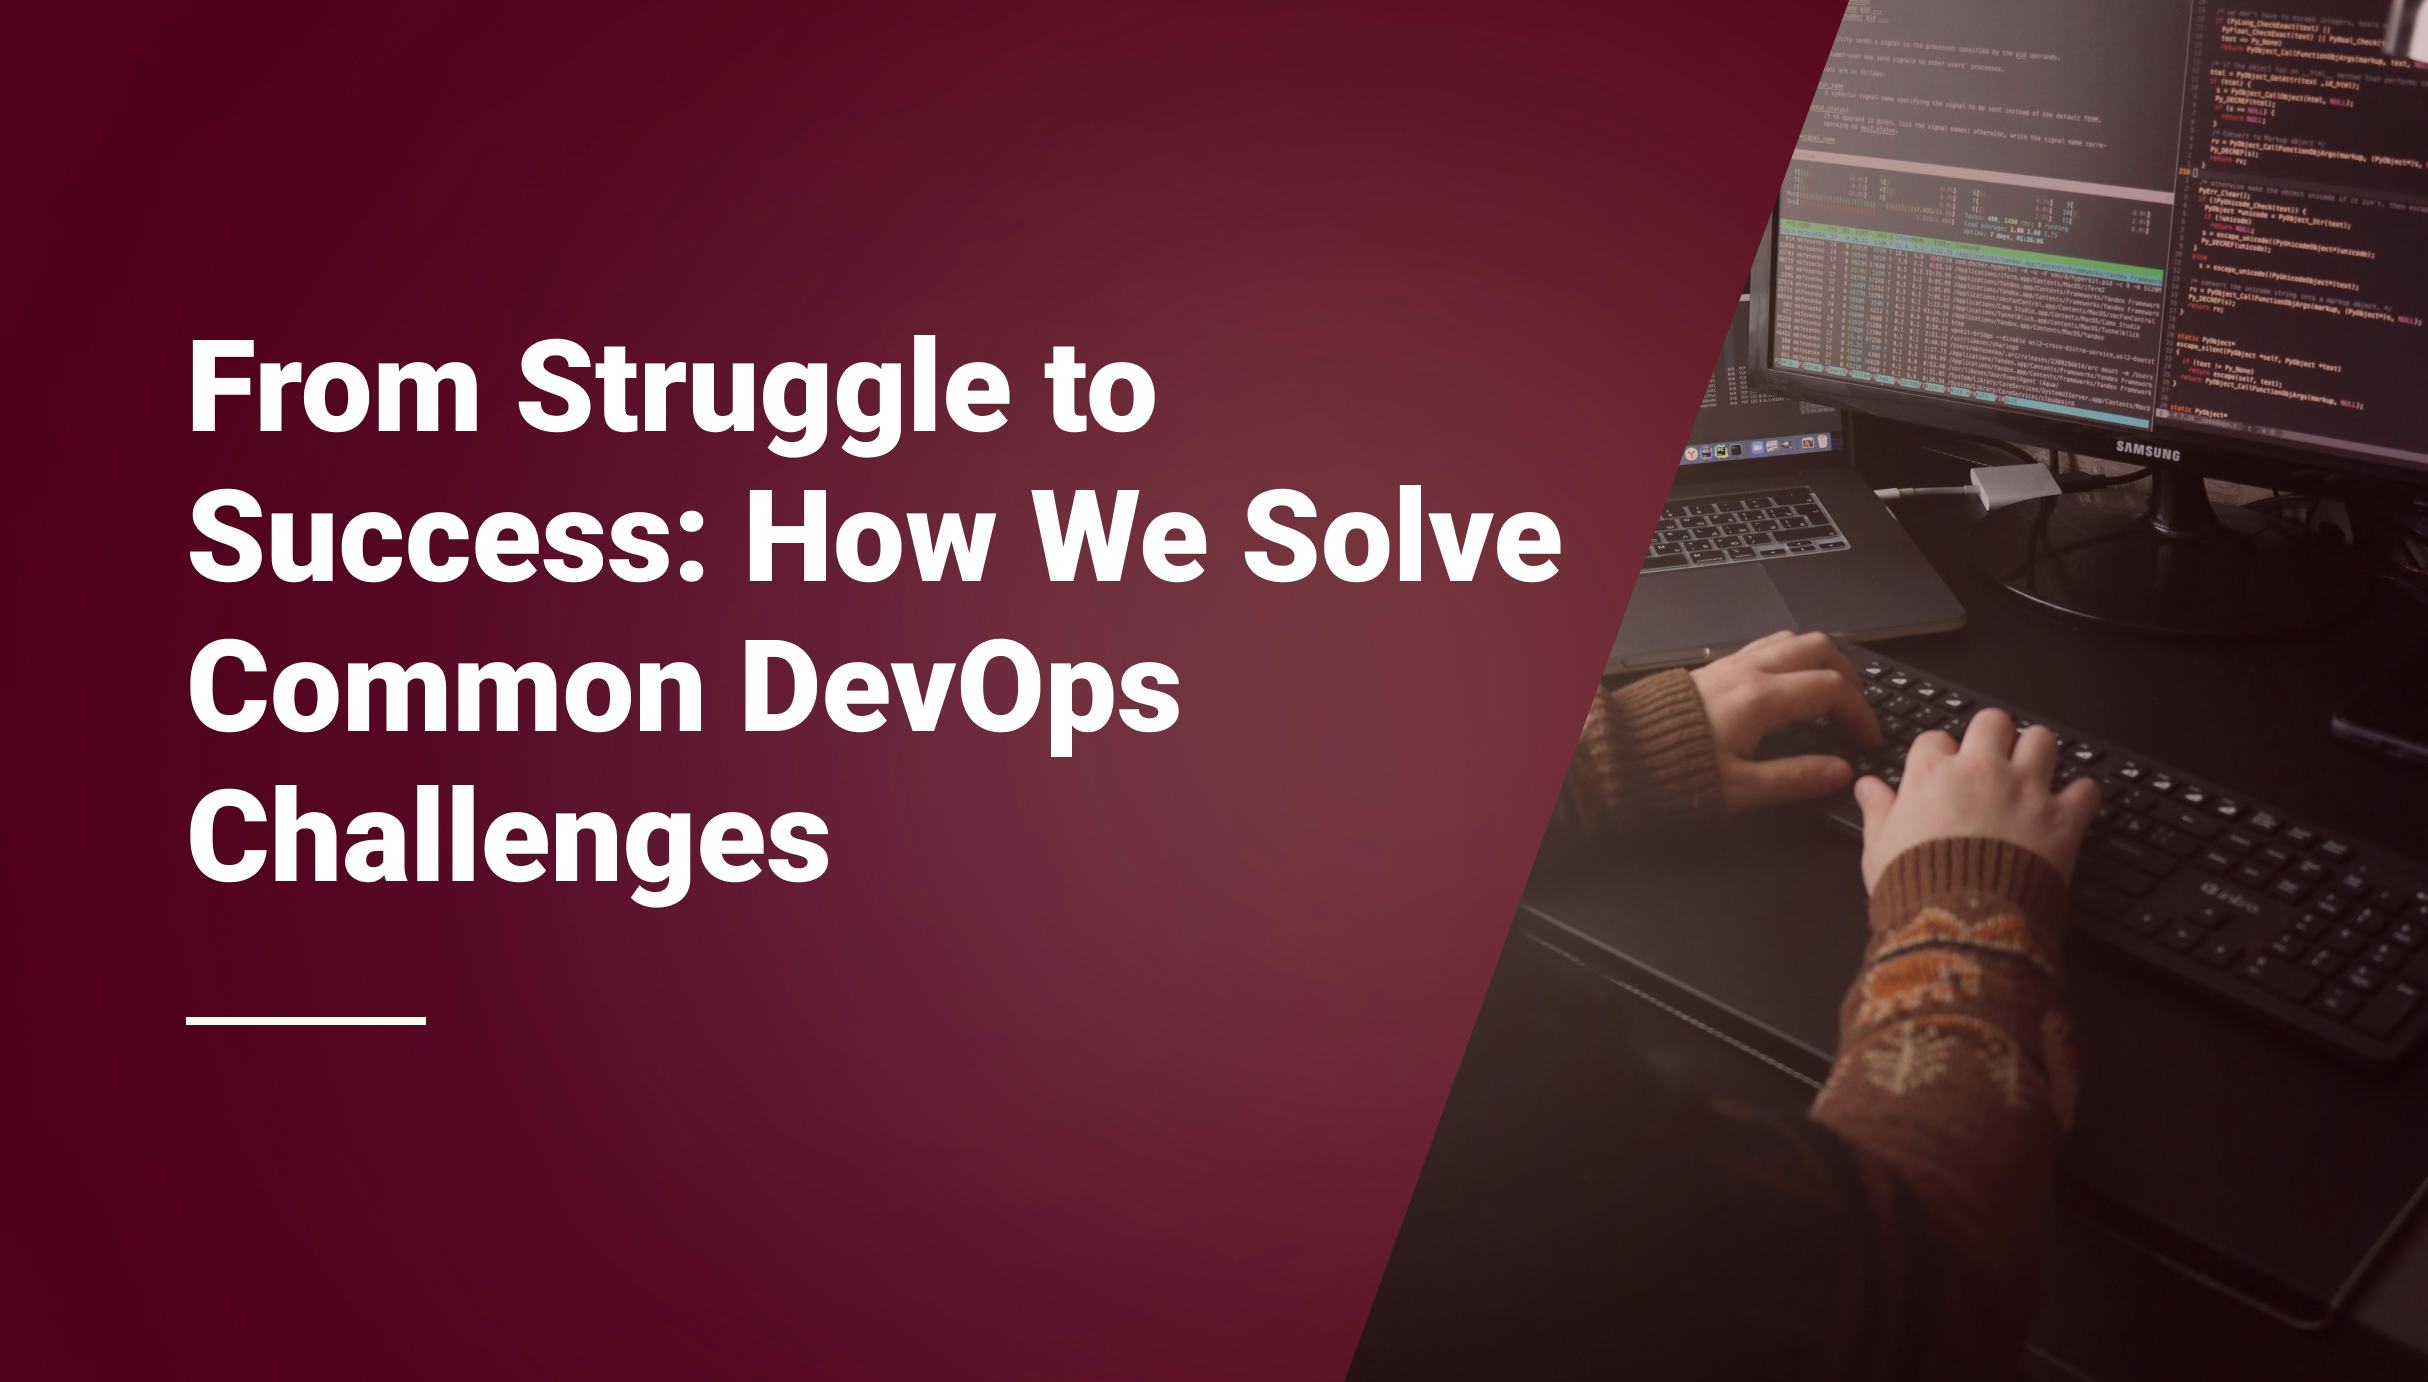 From Struggle to Success: How We Solve Common DevOps Challenges - Qovery